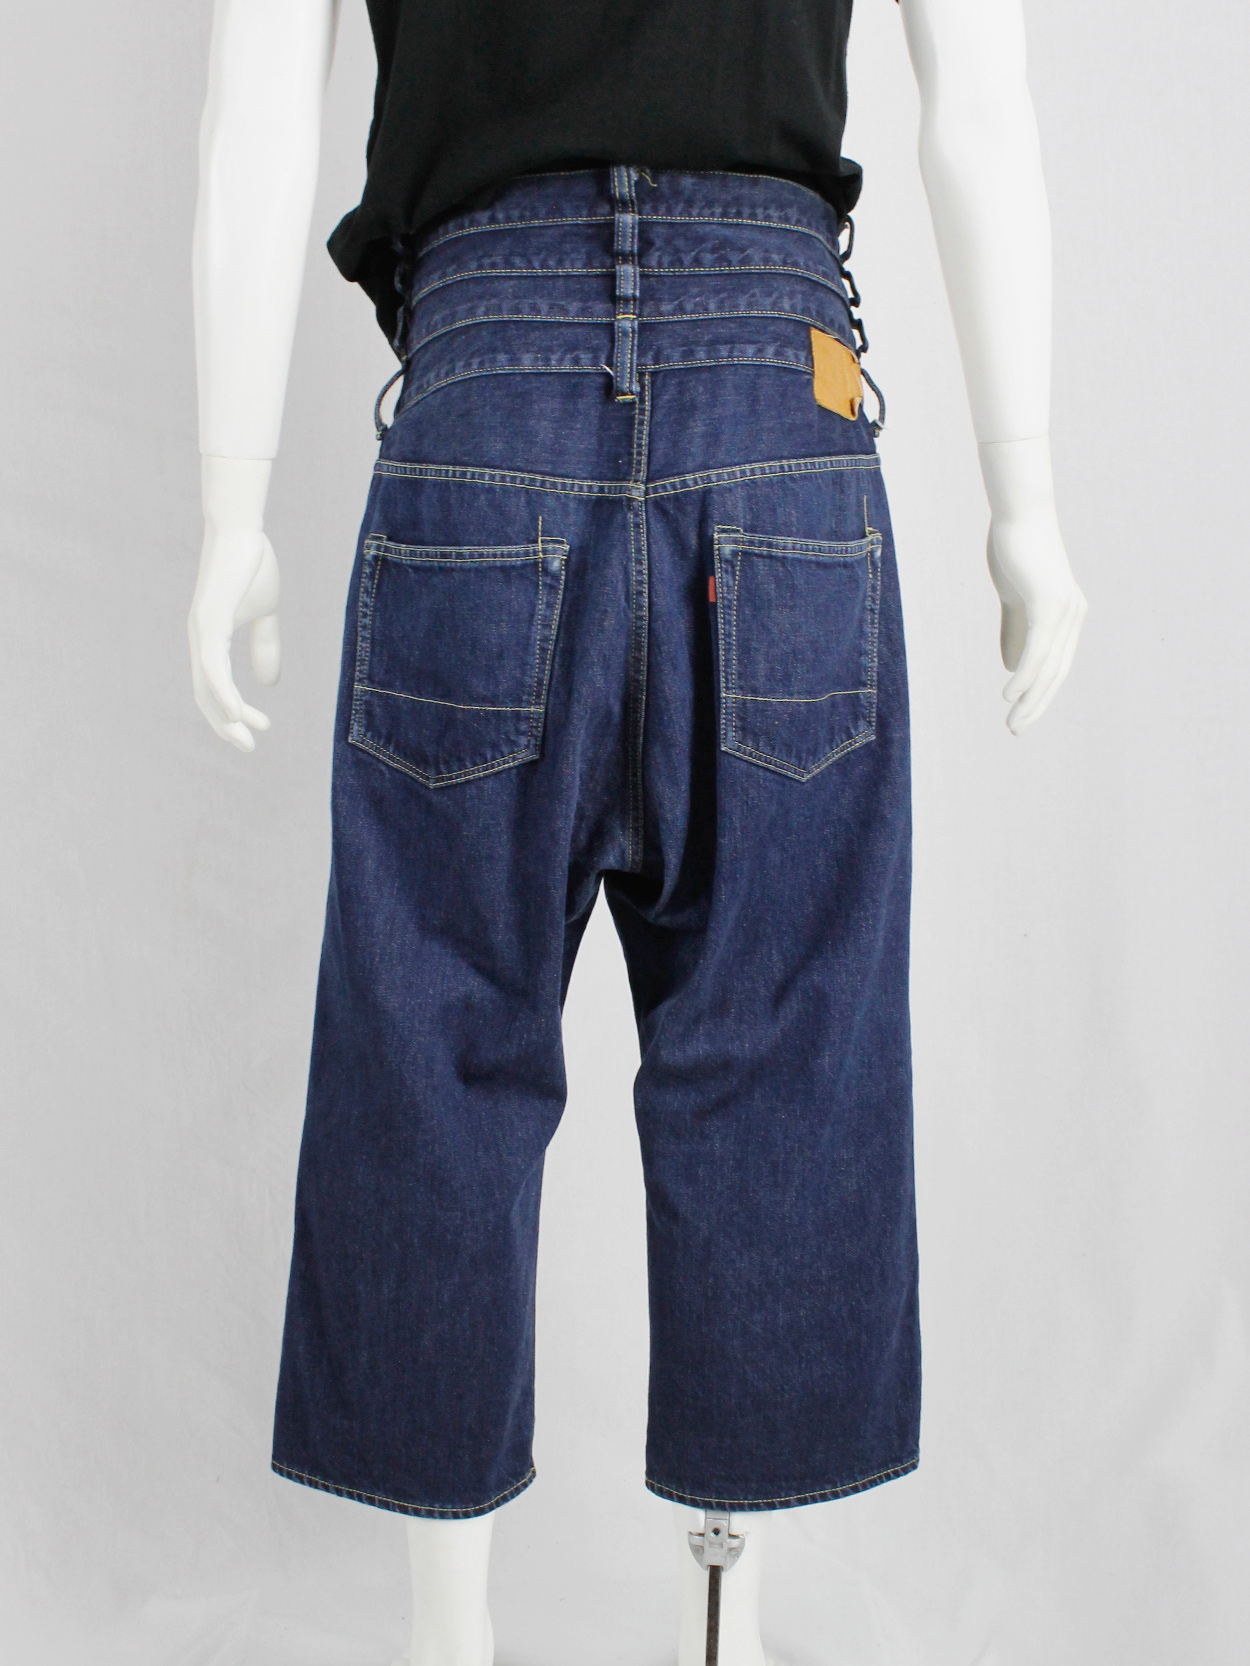 Ganryu denim trousers with quadruple waistband and dropped crotch — AD 2012 (12)